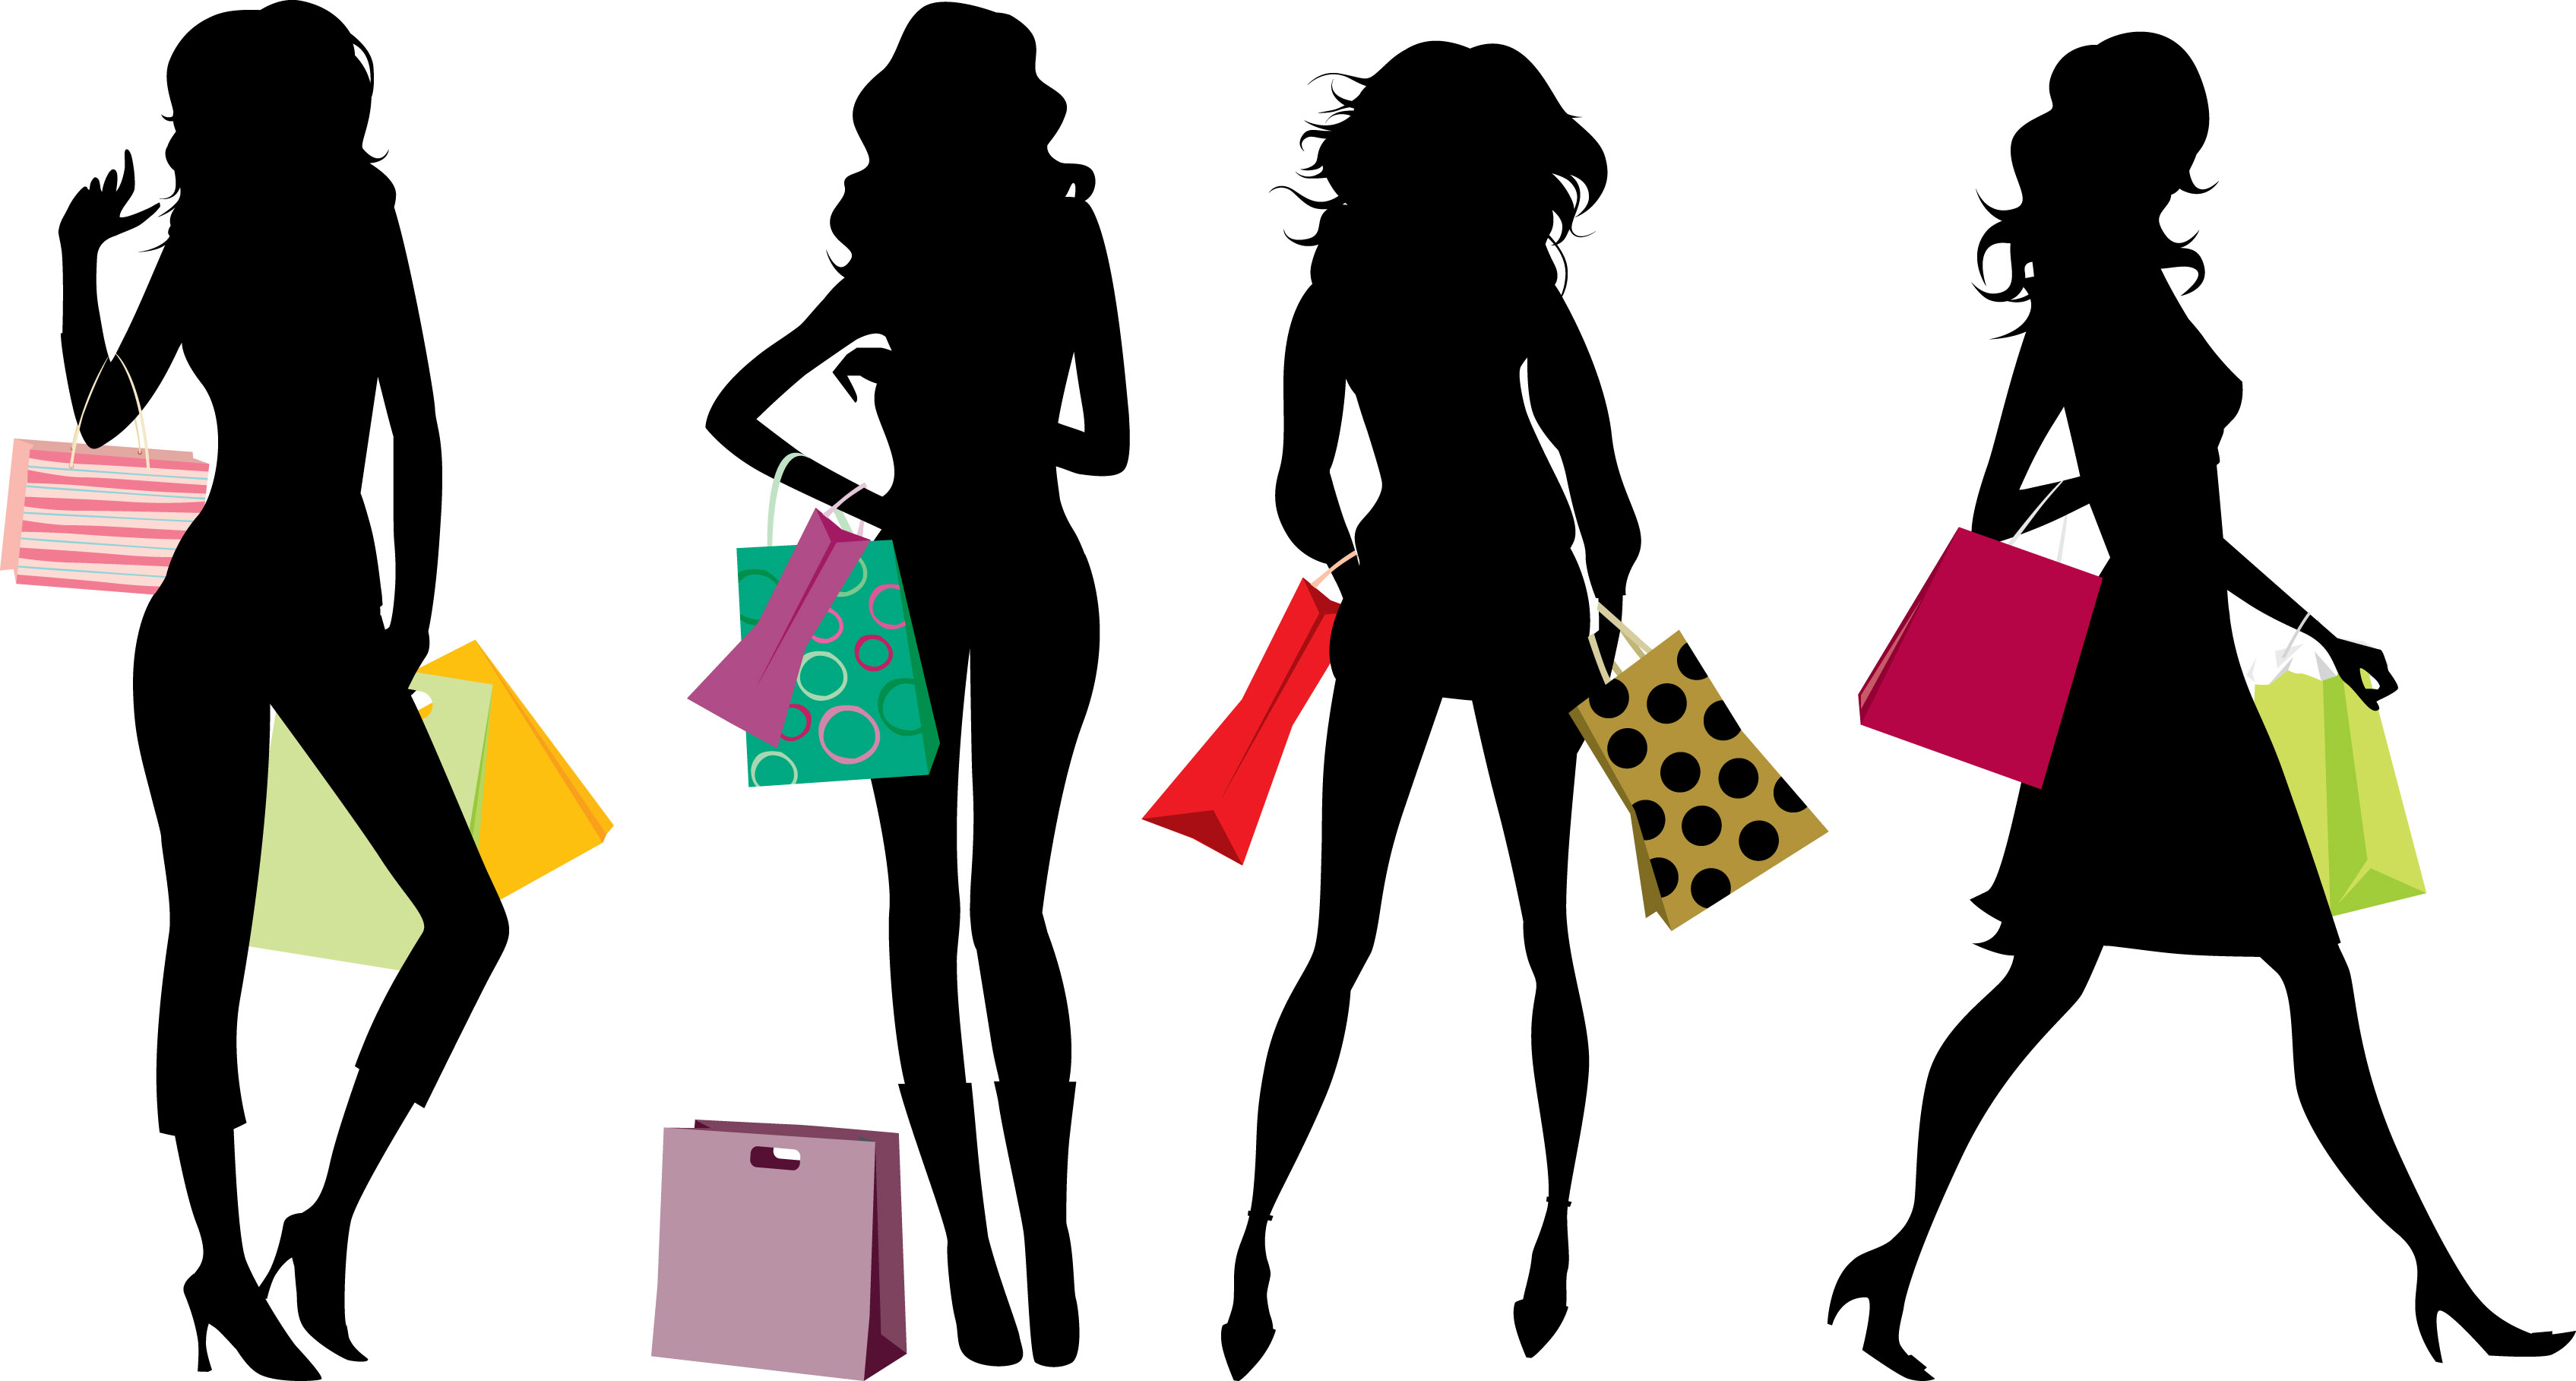 Pictures Of People Shopping - Clipart library